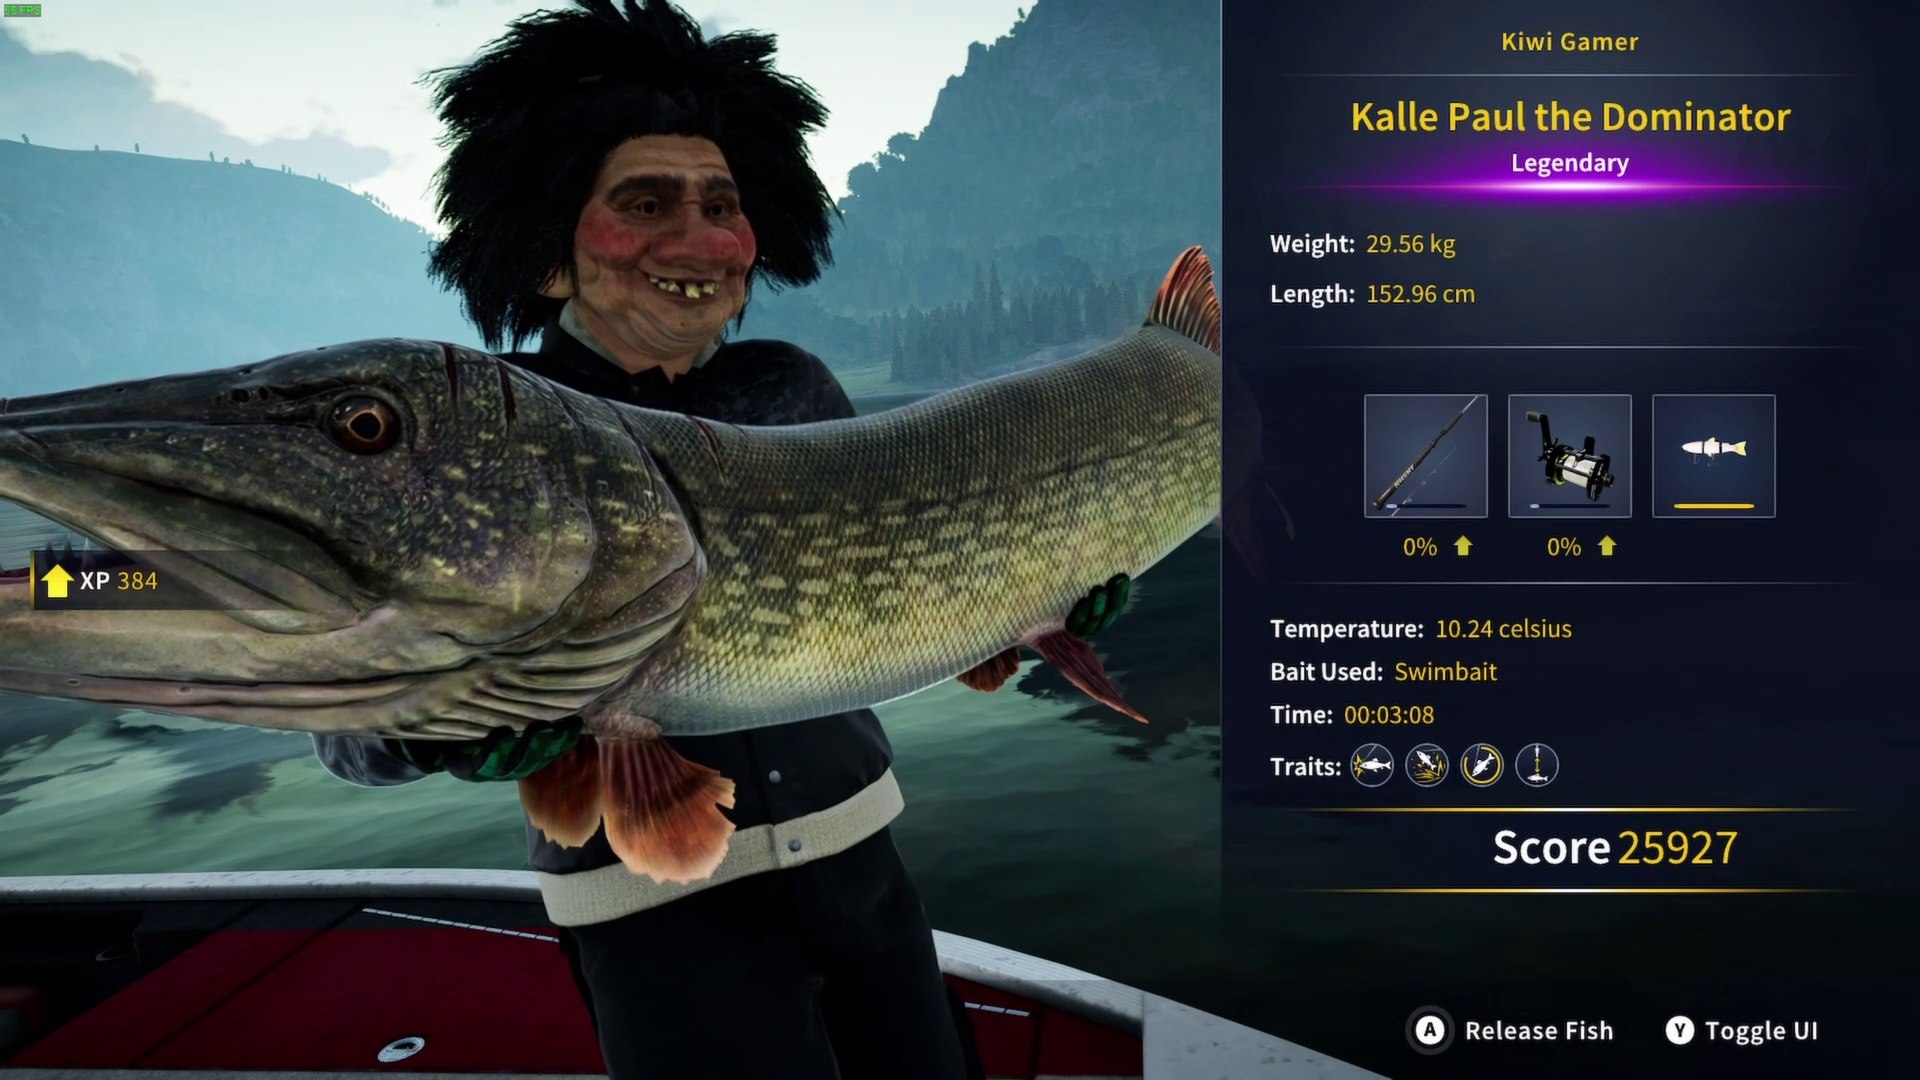 Call Of The Wild The Angler Legendary Fish by Kiwi Gamer - Dailymotion